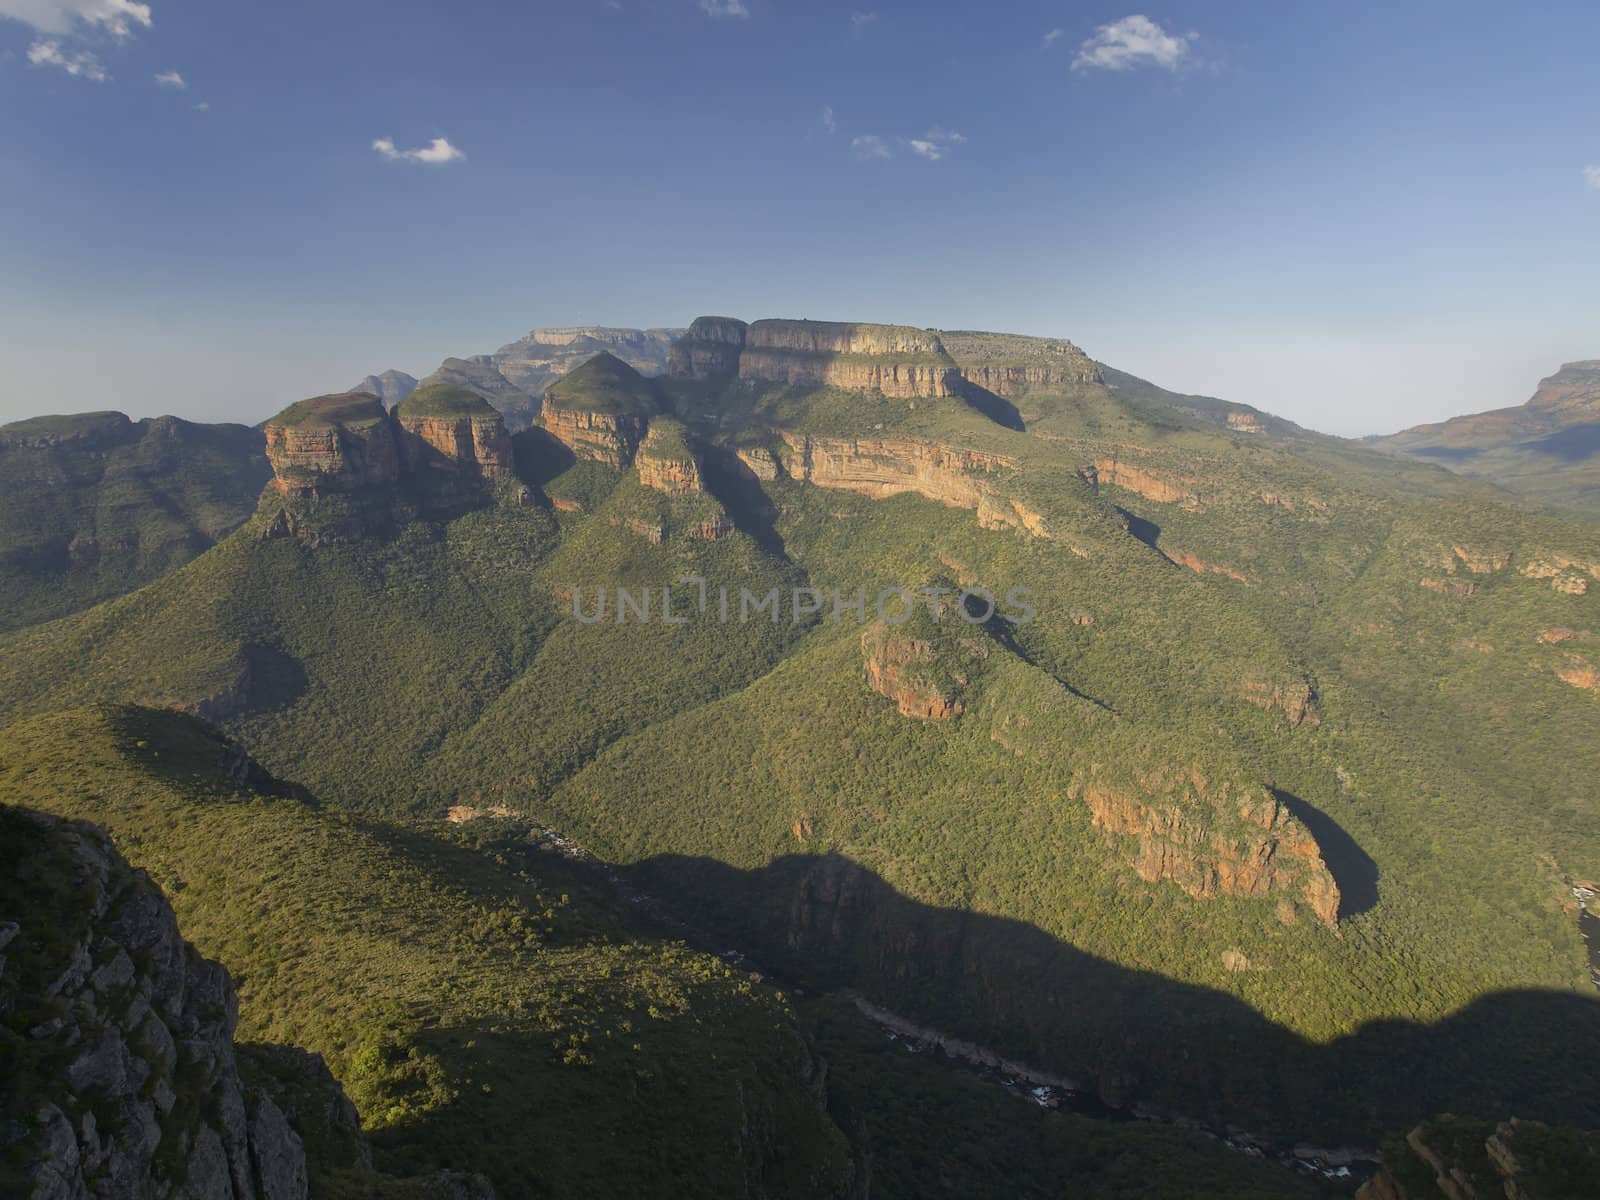 Blyde River Canyon and the three rondovels in Mpummalanga, South Africa